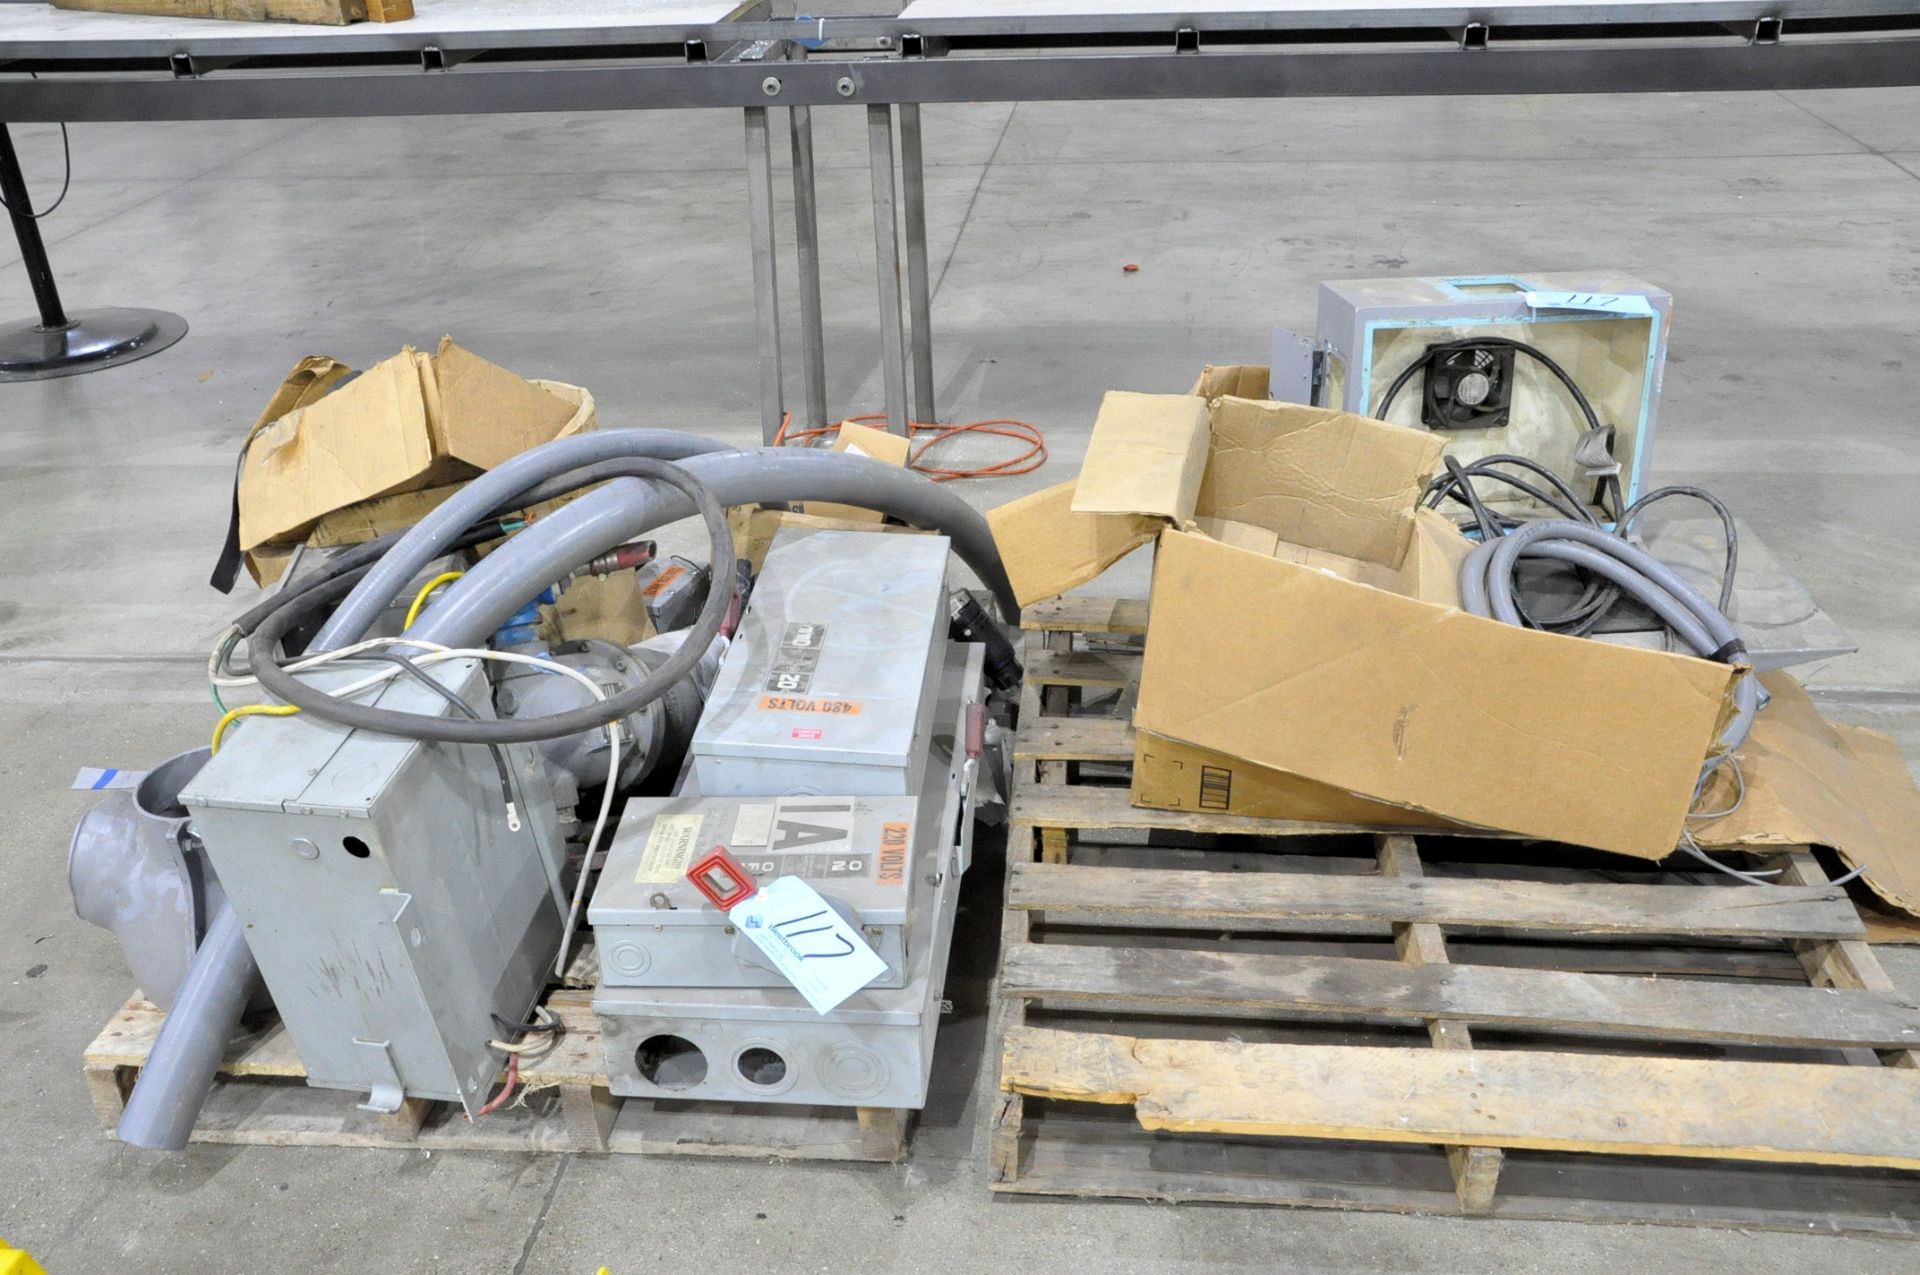 Lot-Safety Switch Boxes, Conduit, Work Boxes, etc. on (2) Pallets